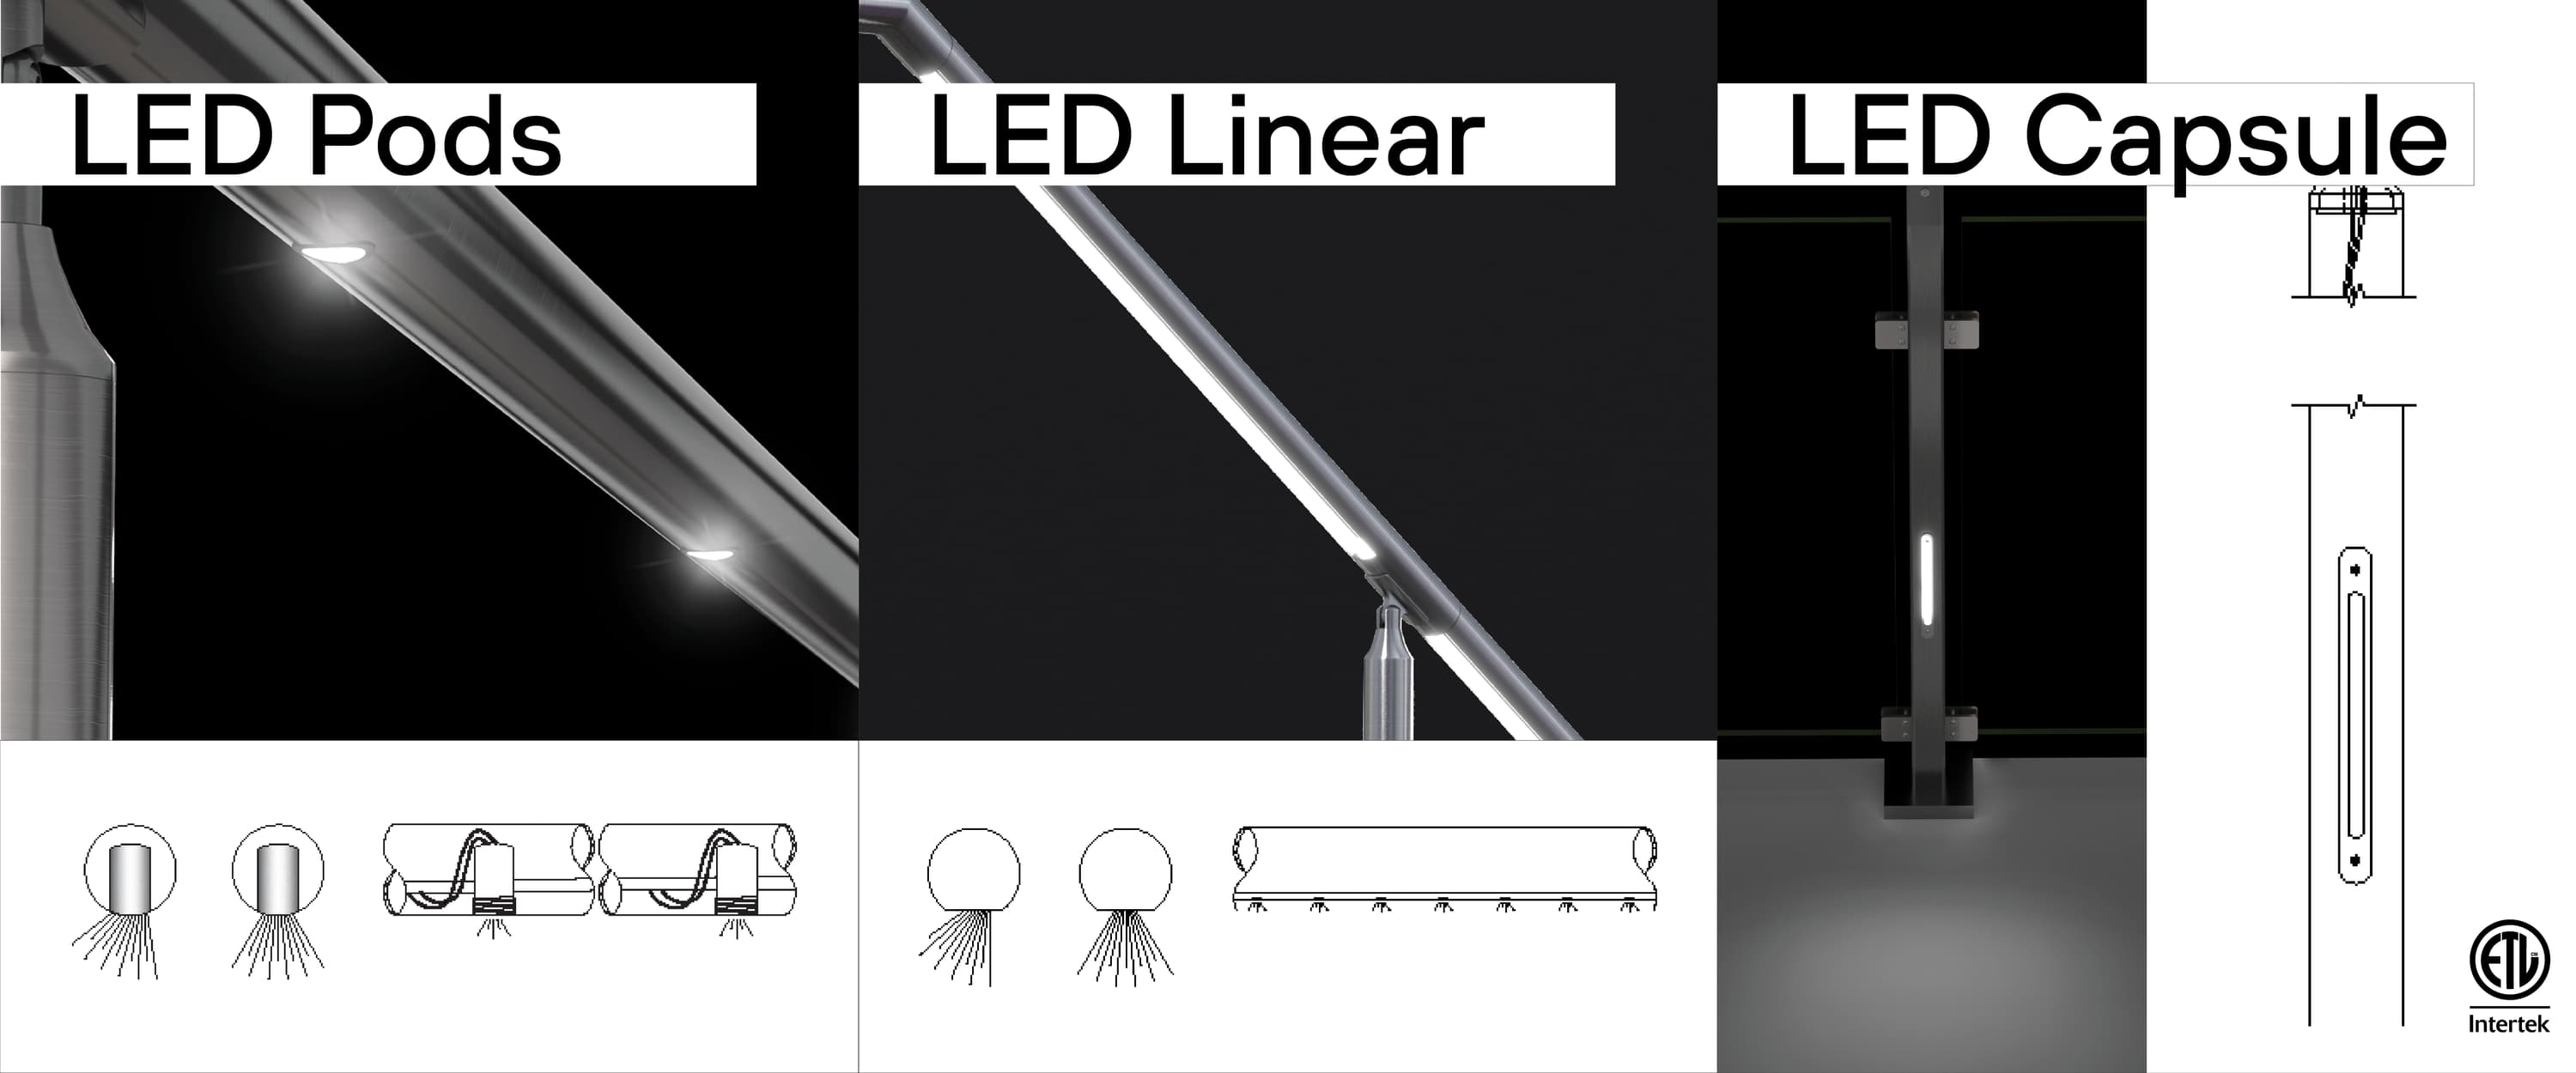 iRail LED - Linear & Pods